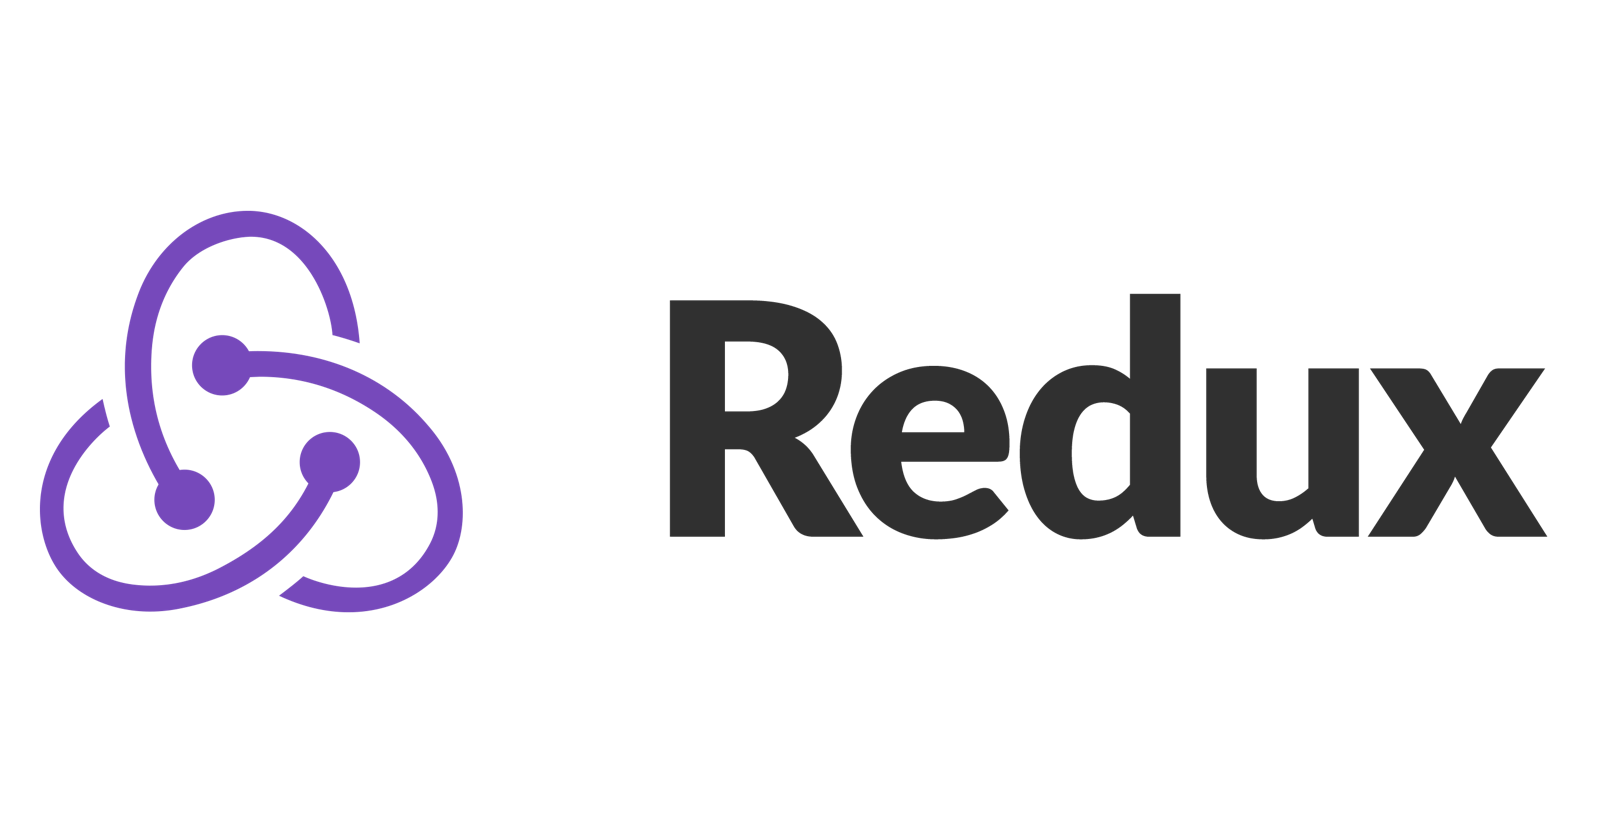 A Quick Introduction to Redux